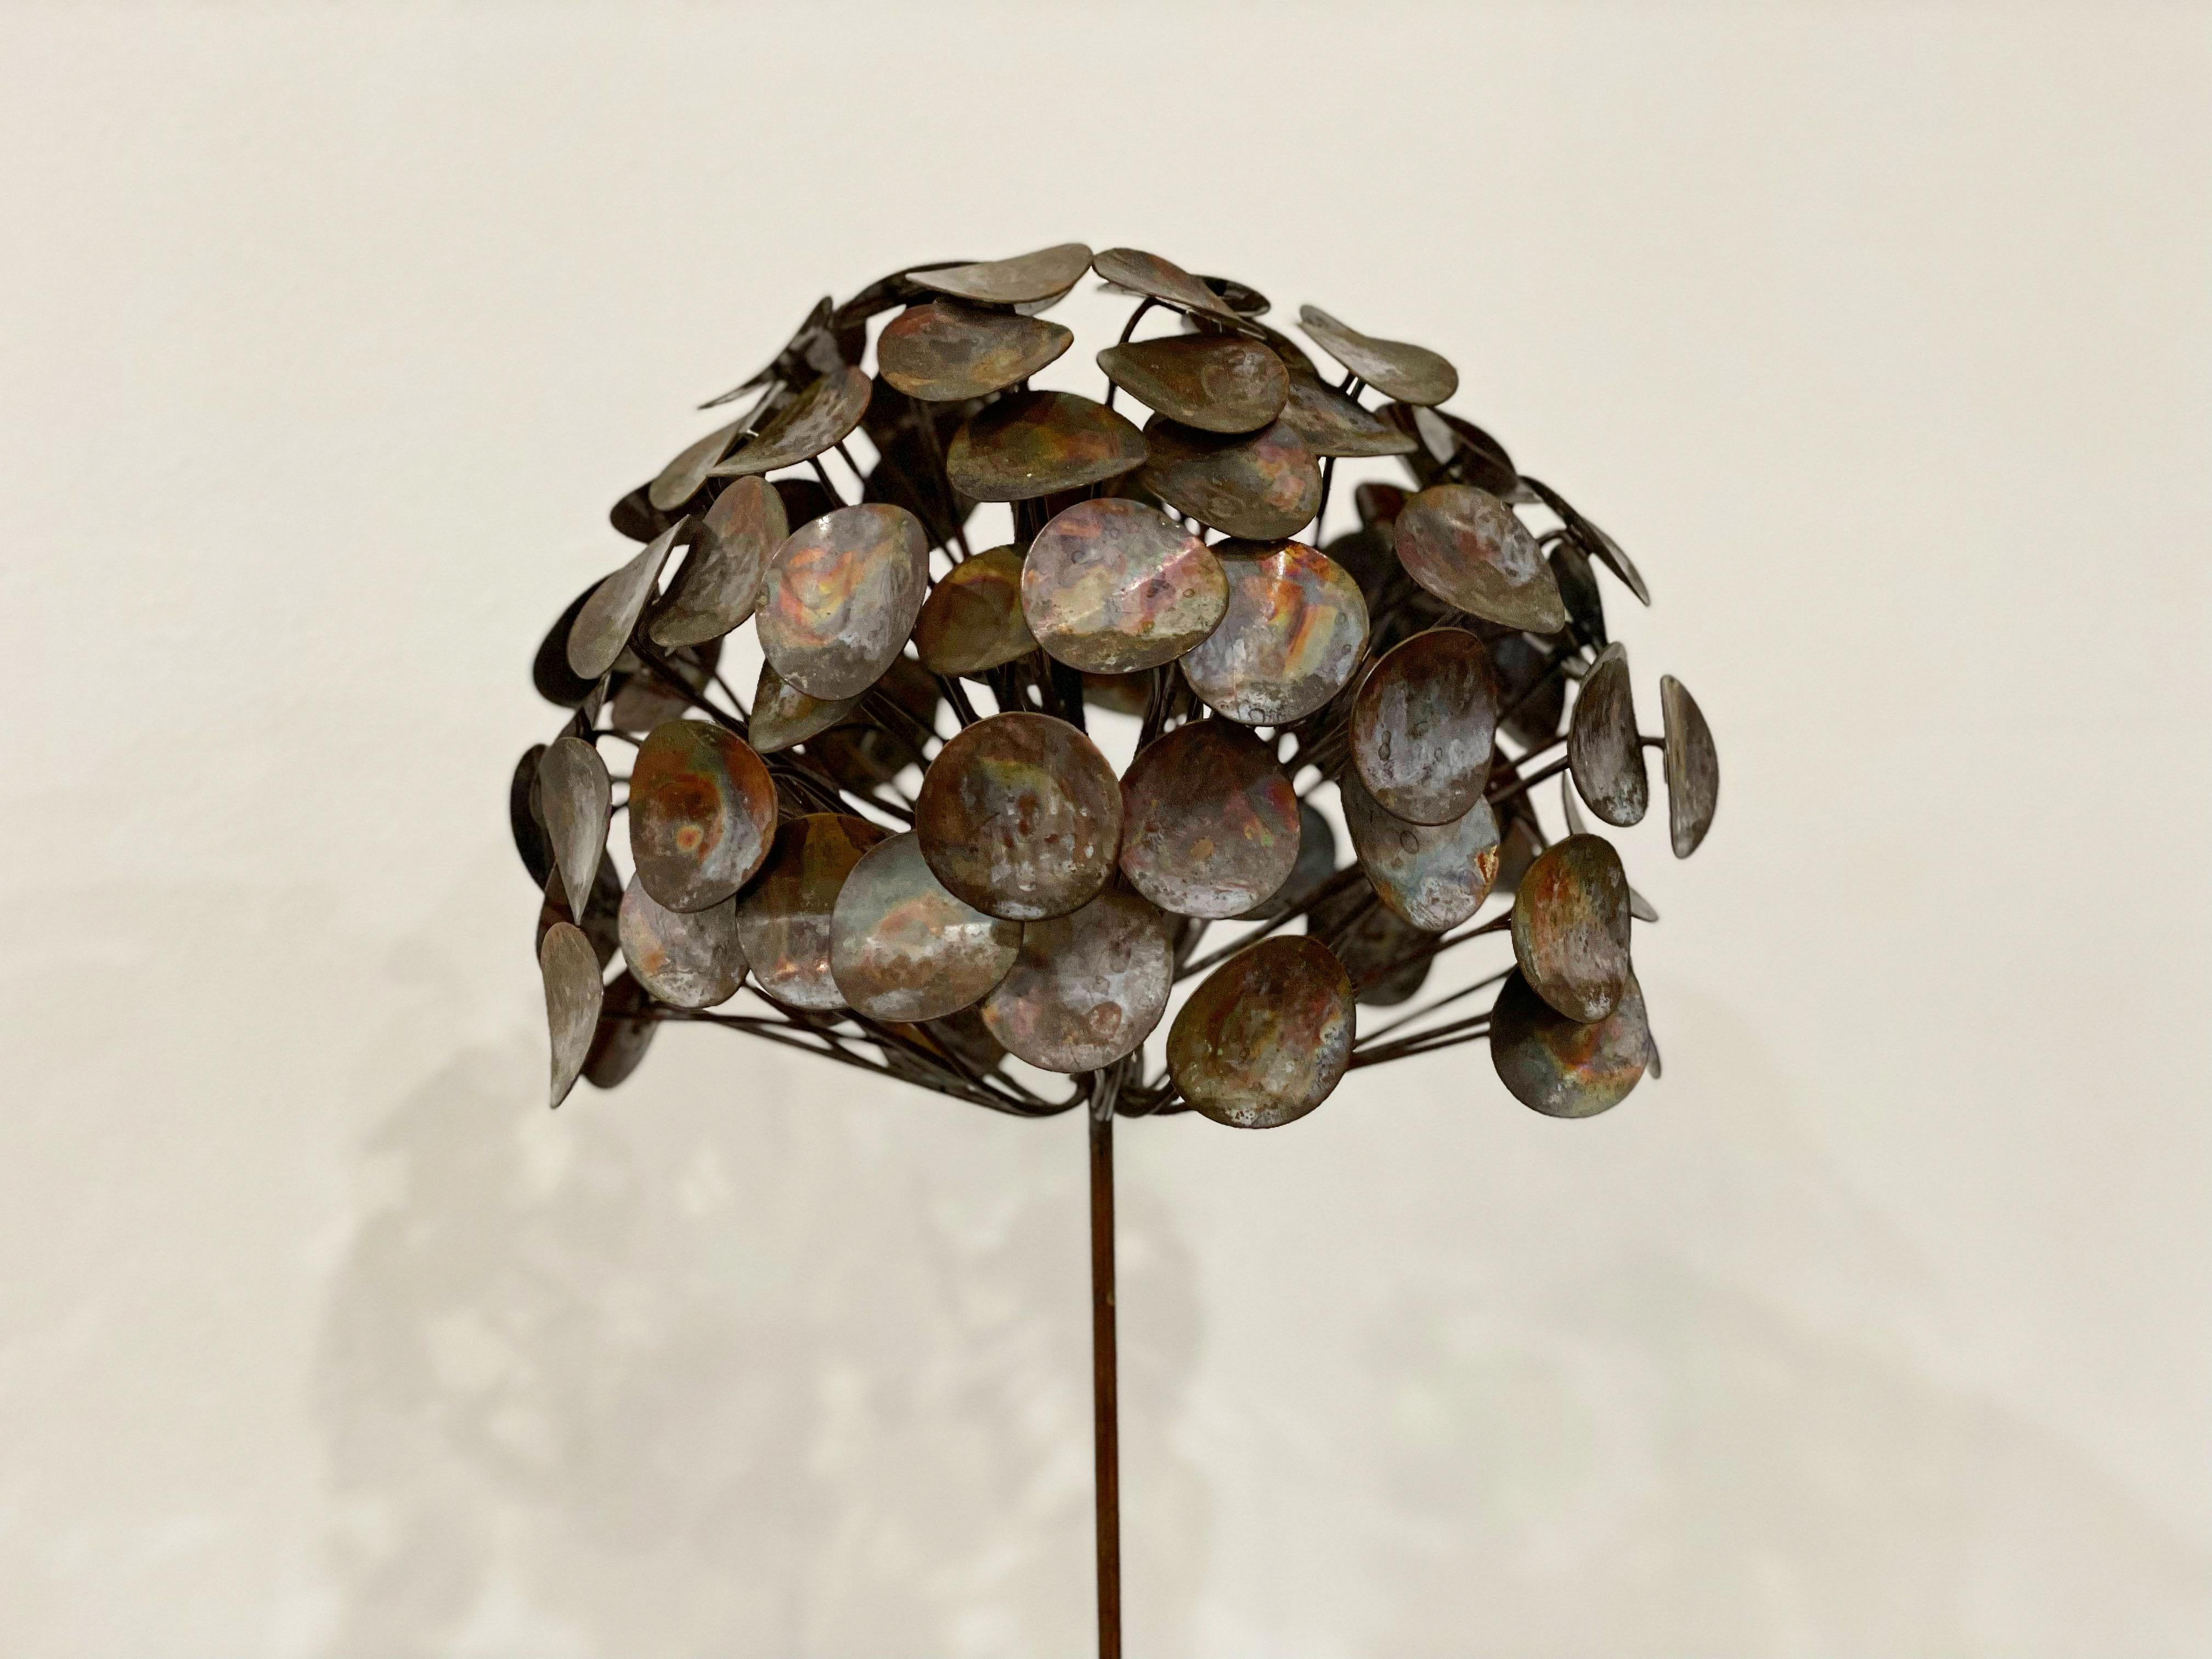 Mid century brutalist style mixed metal flower sculpture, after Curtis Jere. Unsigned. Patinated metals mounted on a black lacquered wood block.
Excellent condition with no flaws of note. Ready for installation.

Measures: W10